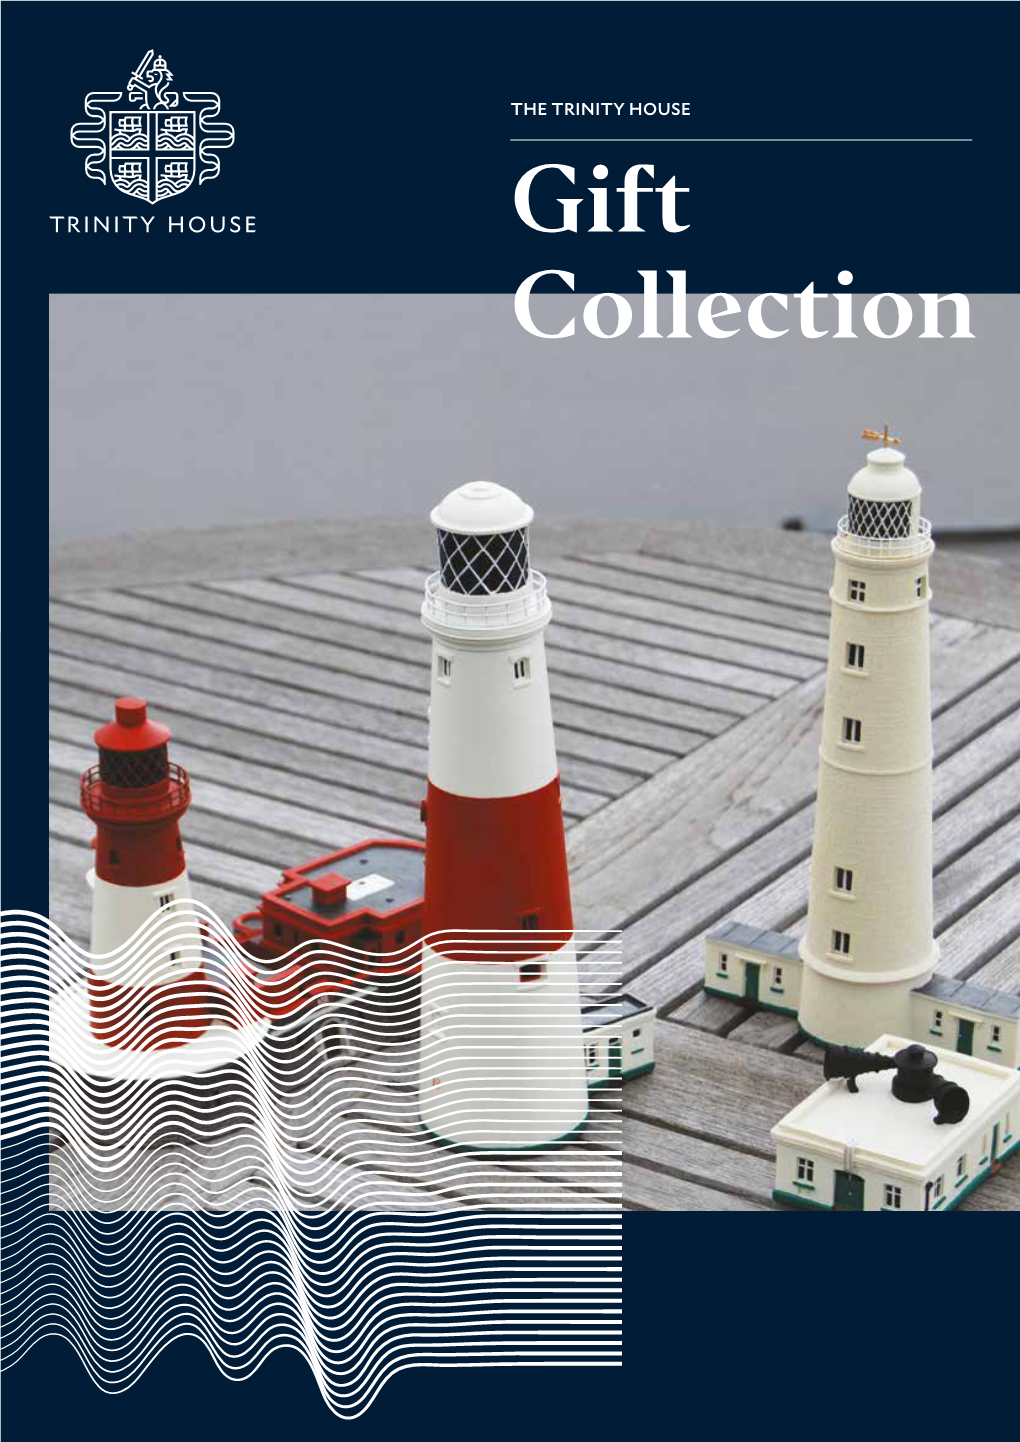 Gift Collection Lighthouse Models